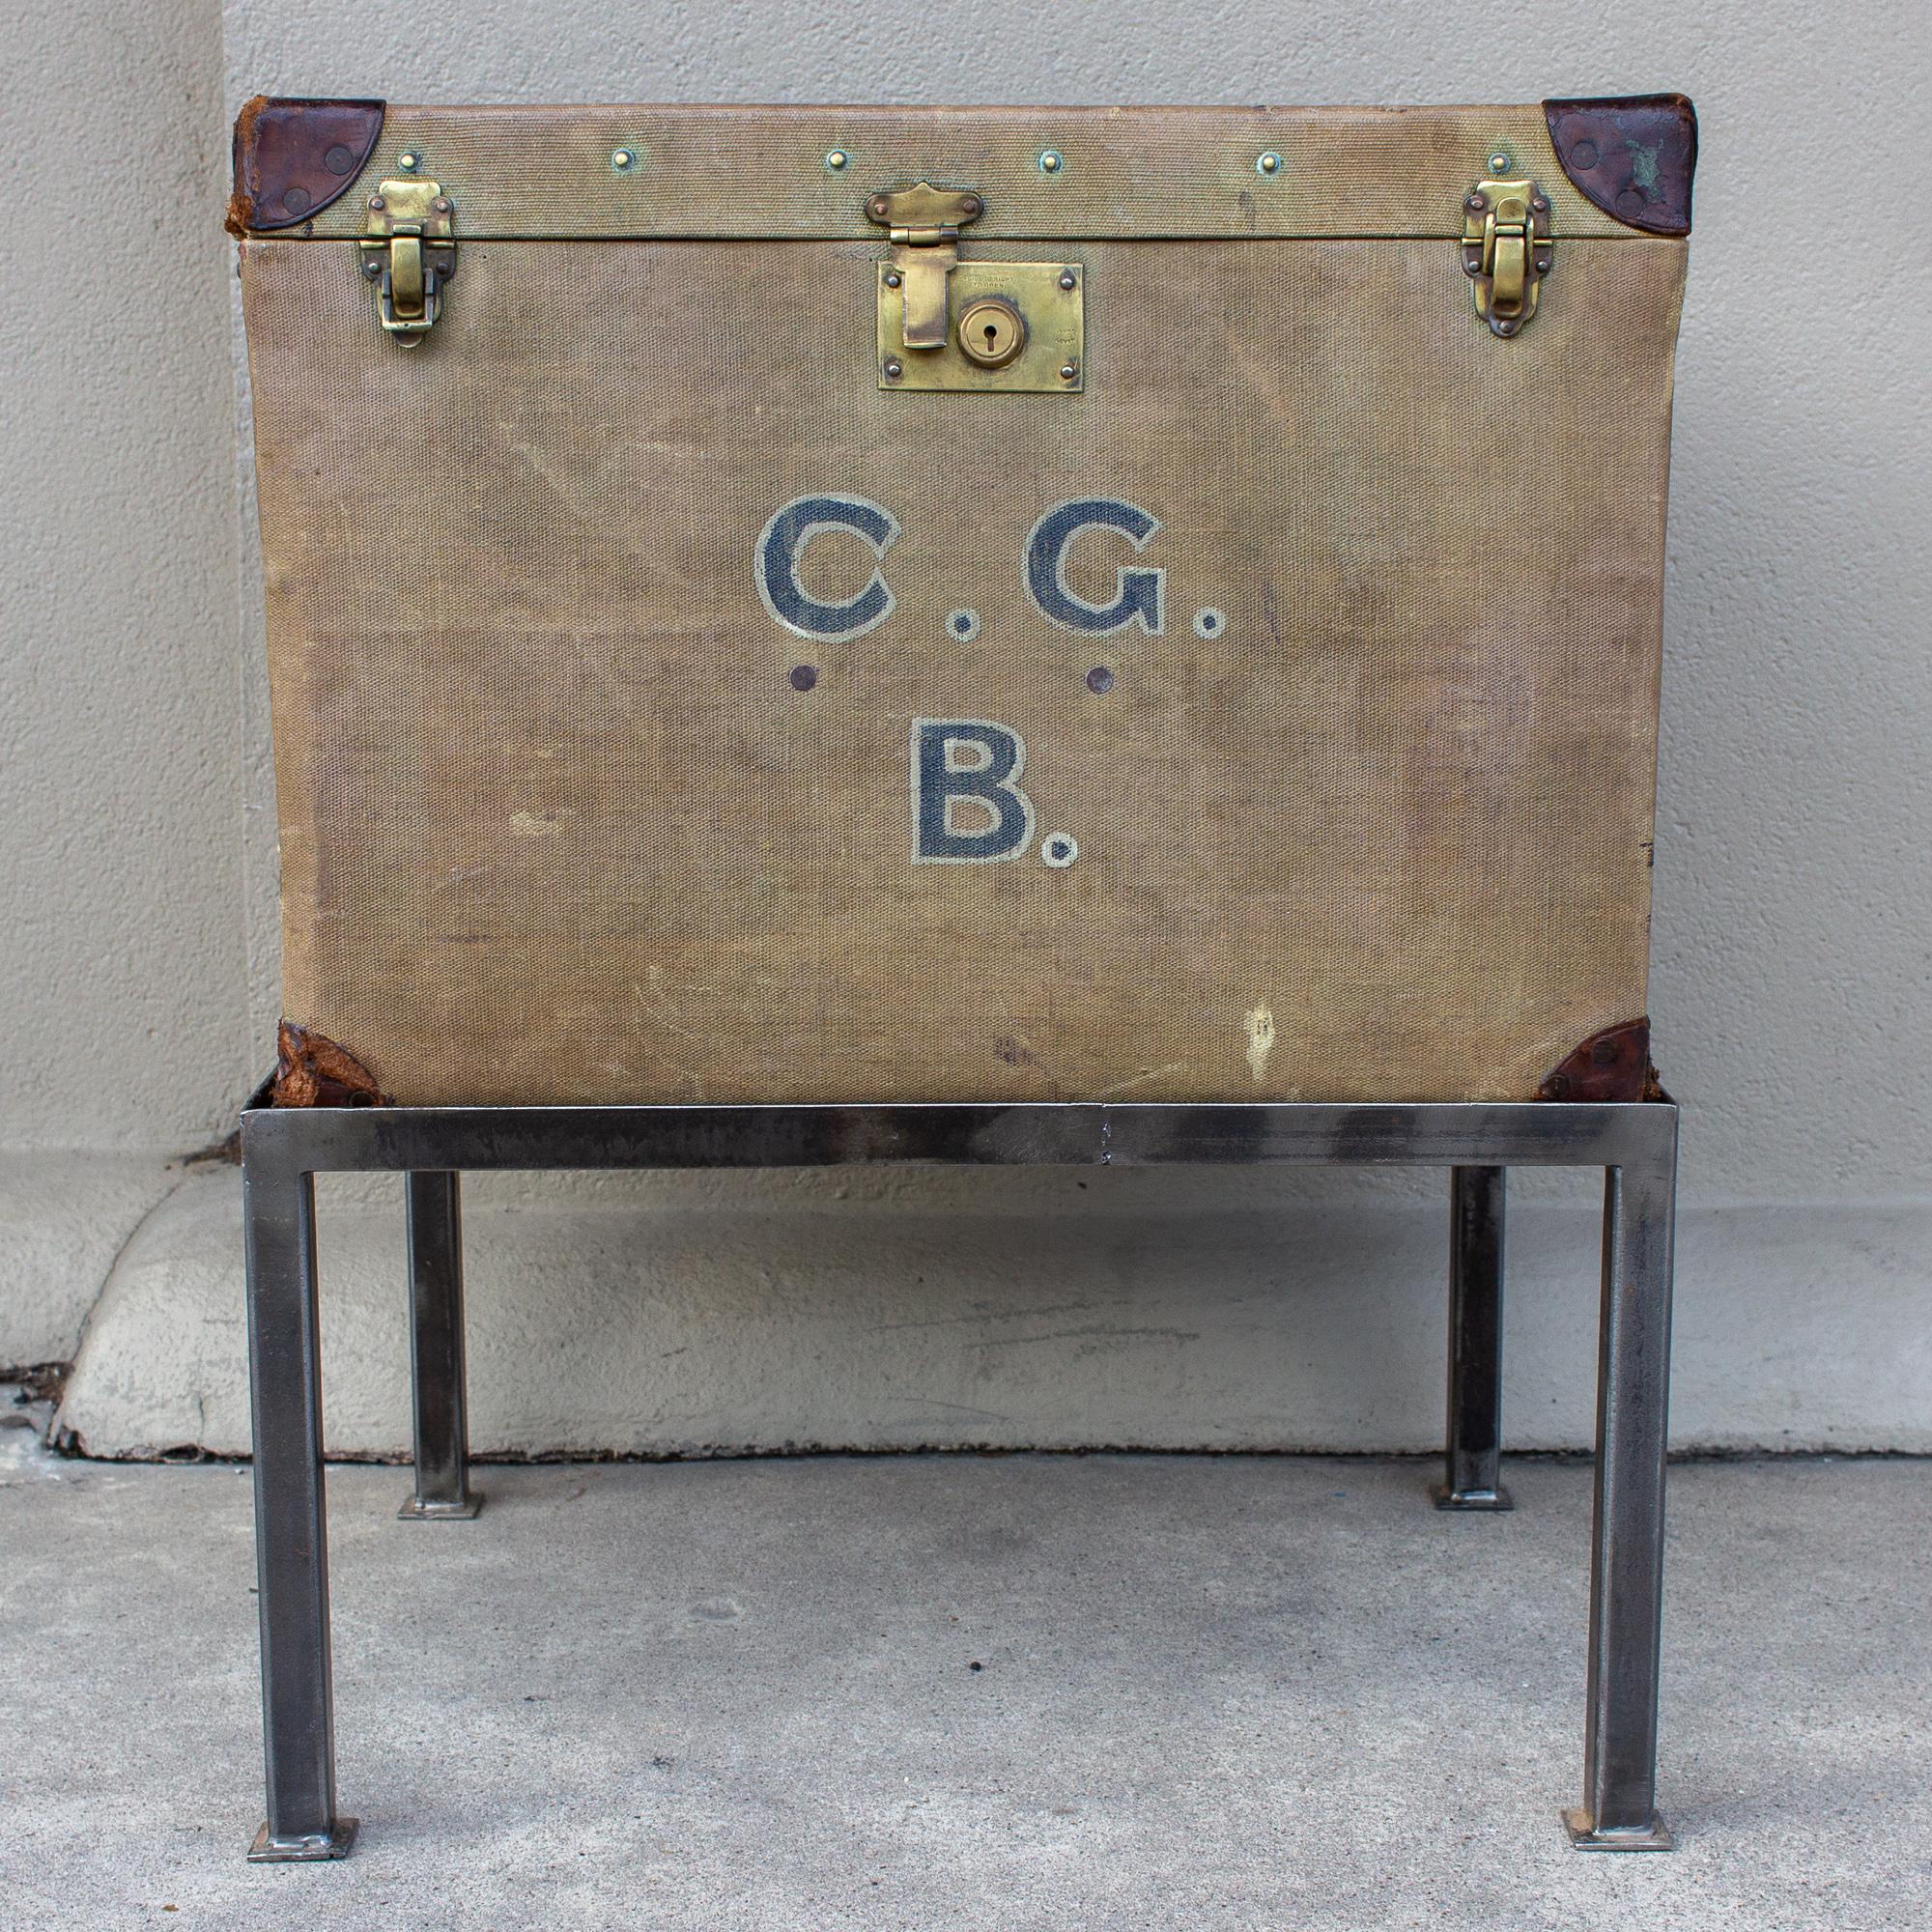 This antique English luggage piece has been crafted into a side table with a custom iron base. The trunk has the initials CGB on the front and was part of a luggage set belonging to an officer in the British Royal Navy. The trunk is a khaki green